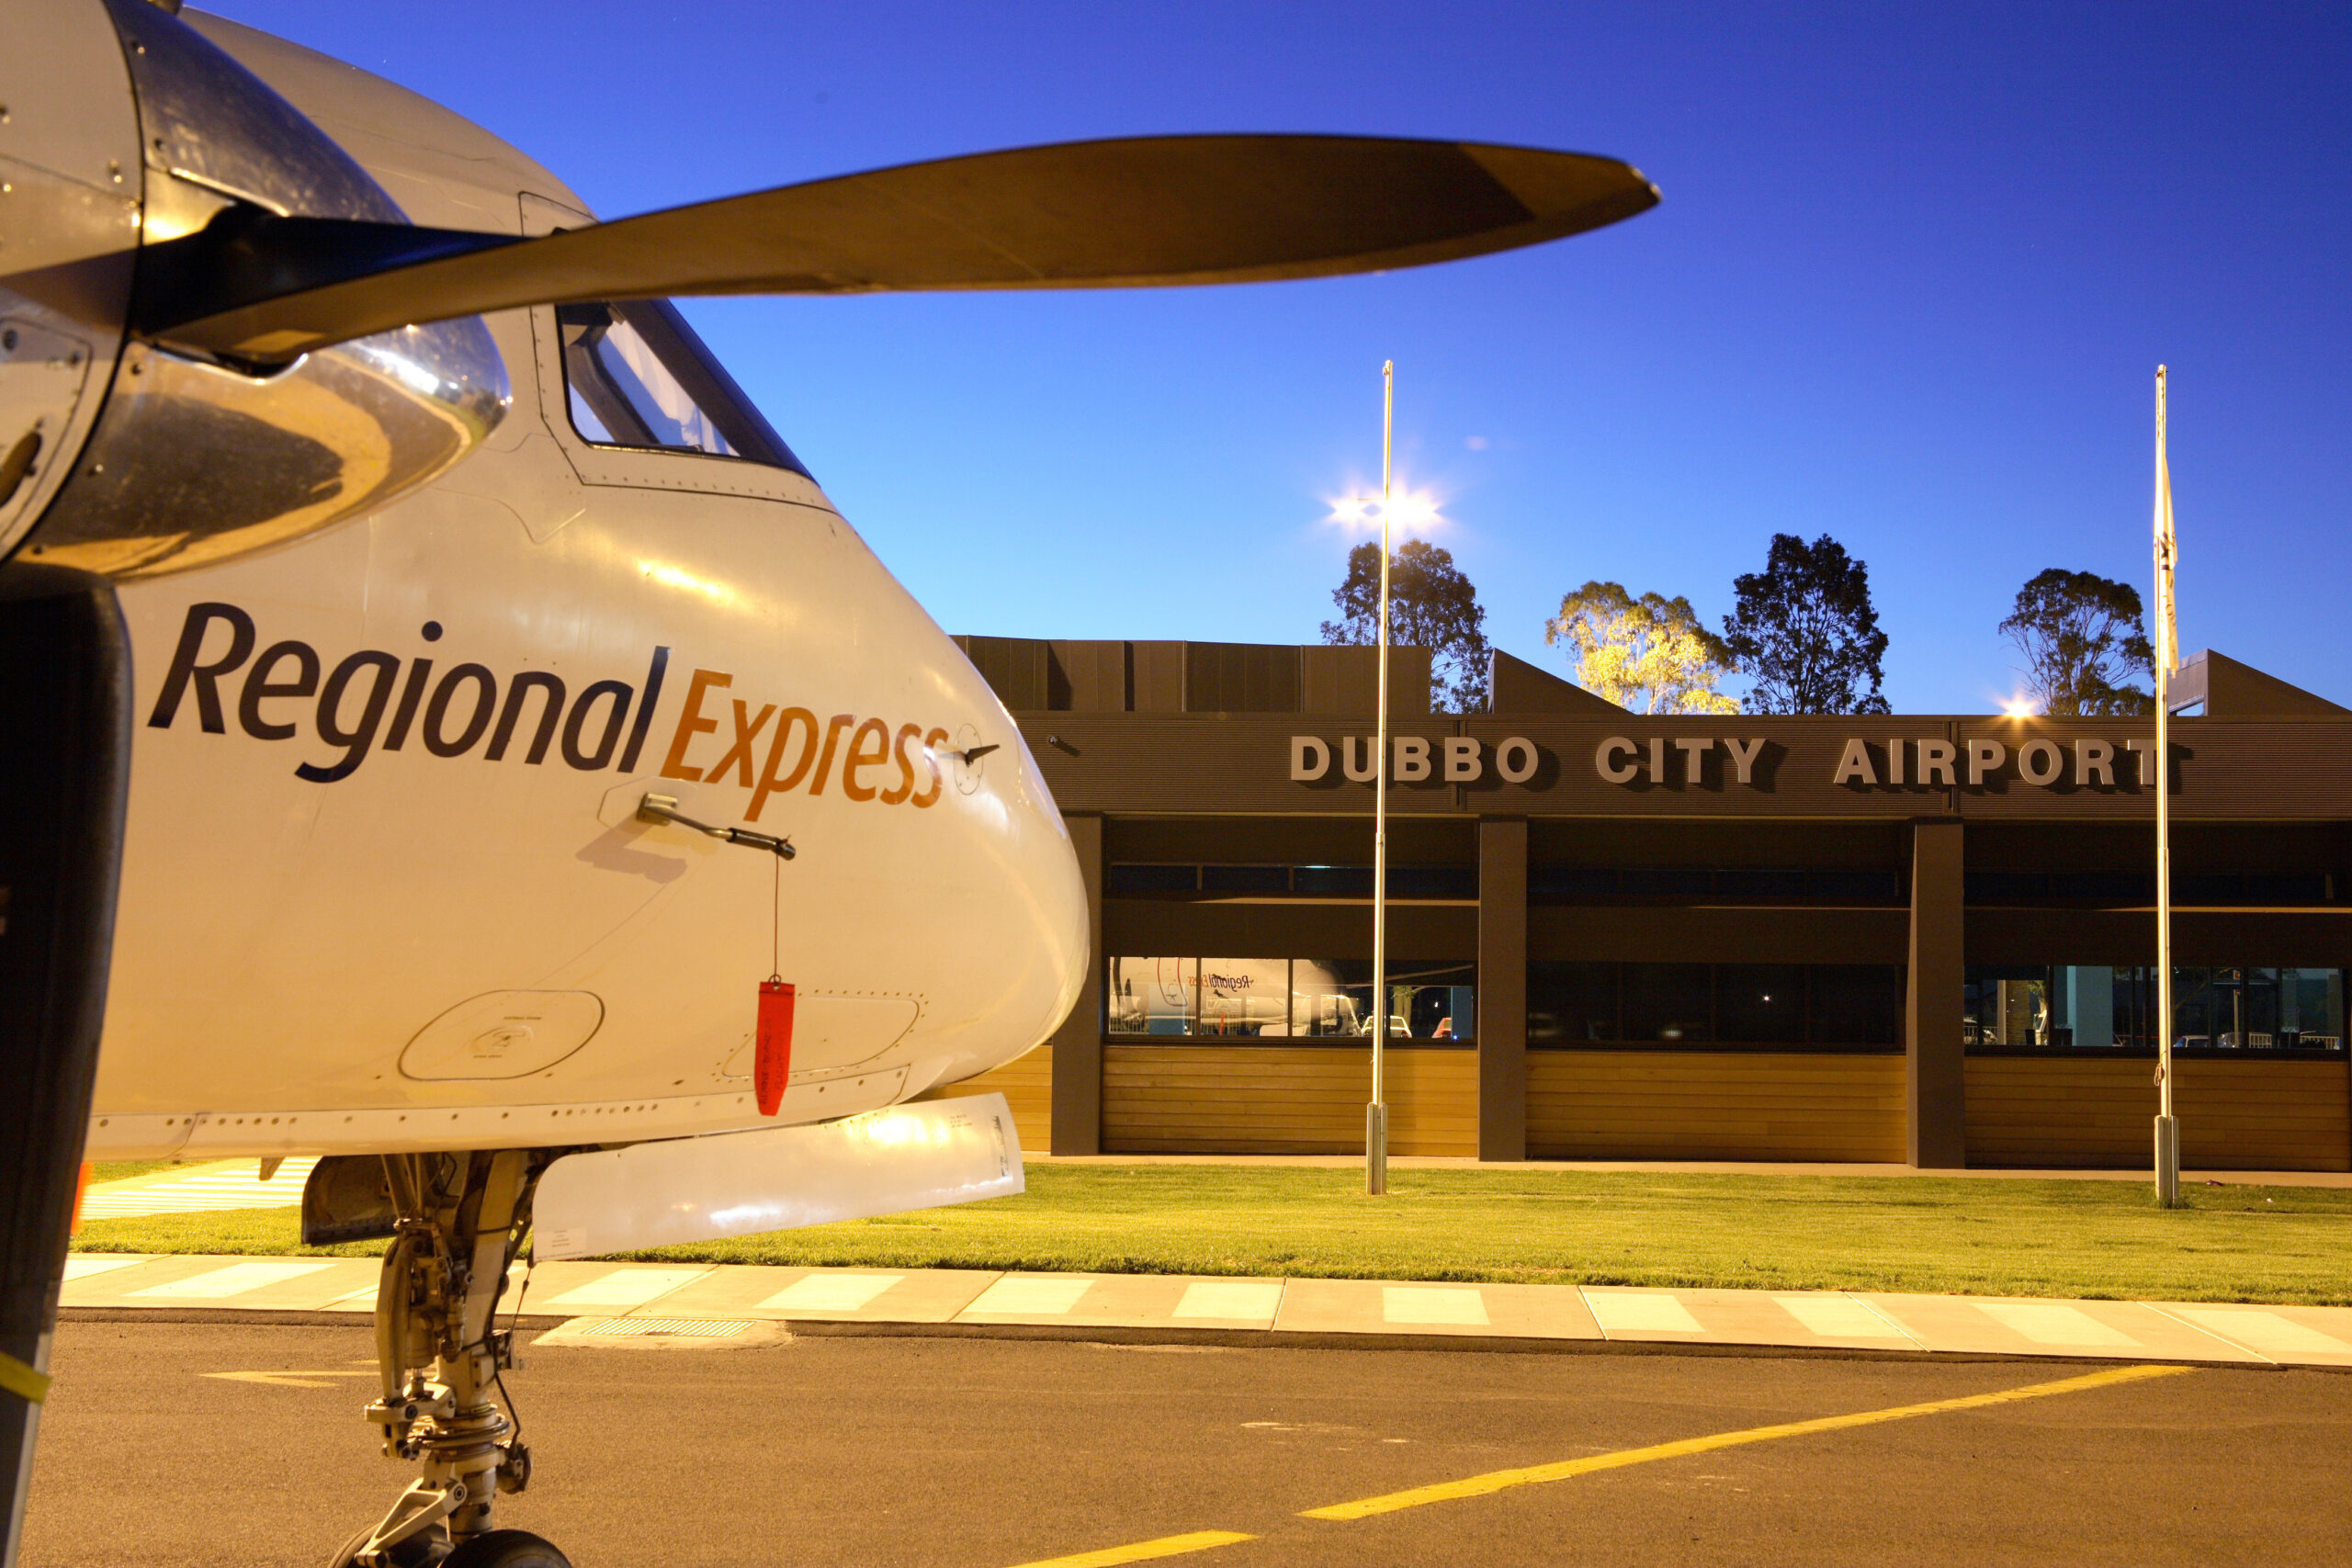 REGIONAL AIRPORTS – What is their contribution to Australia?